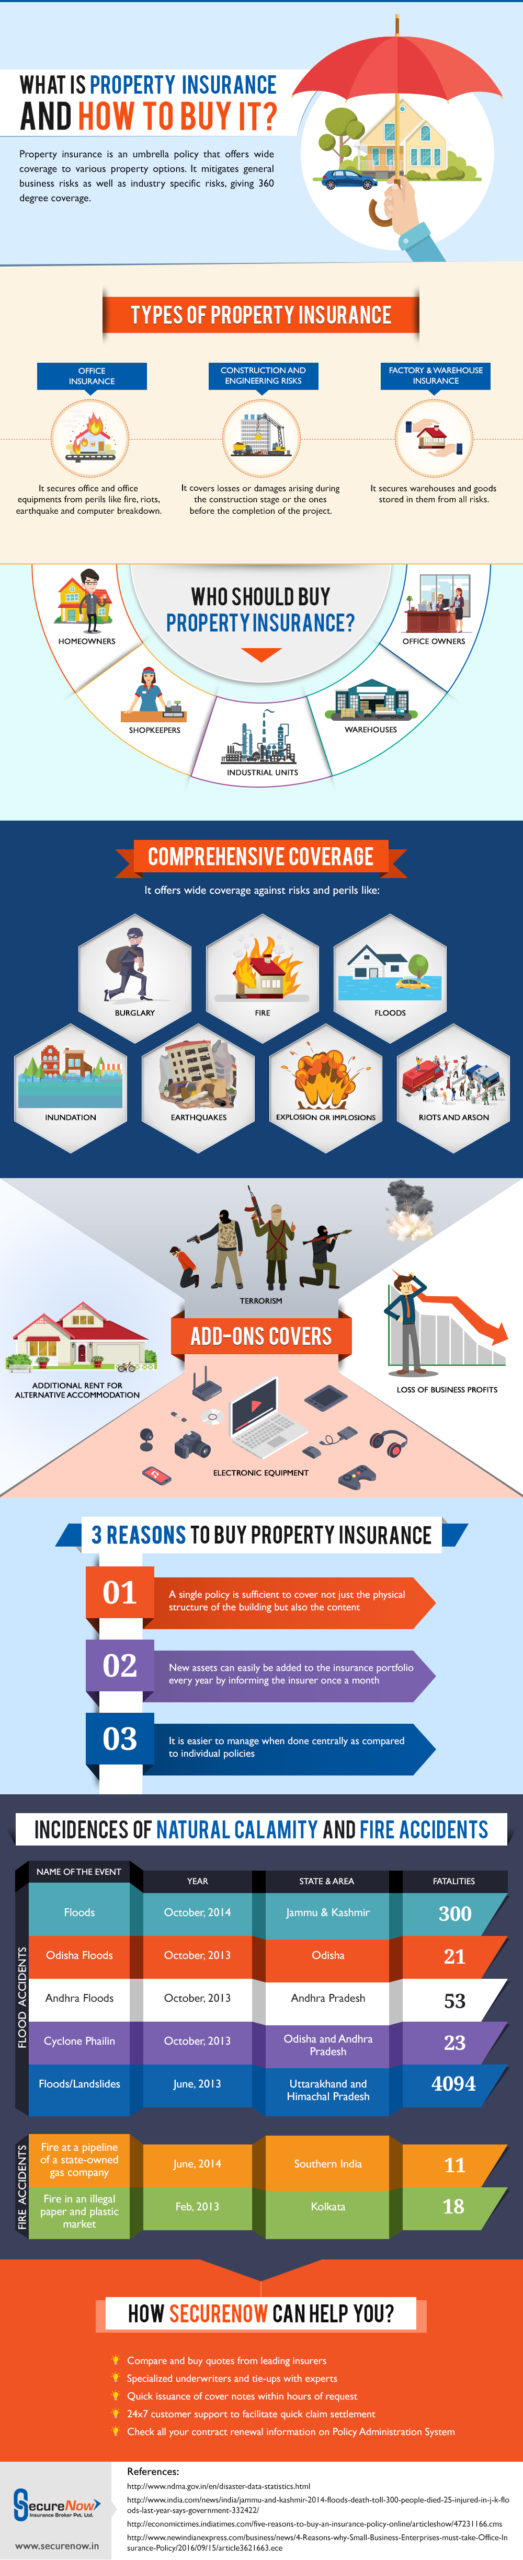 What is Property Insurance and How to Buy It ?